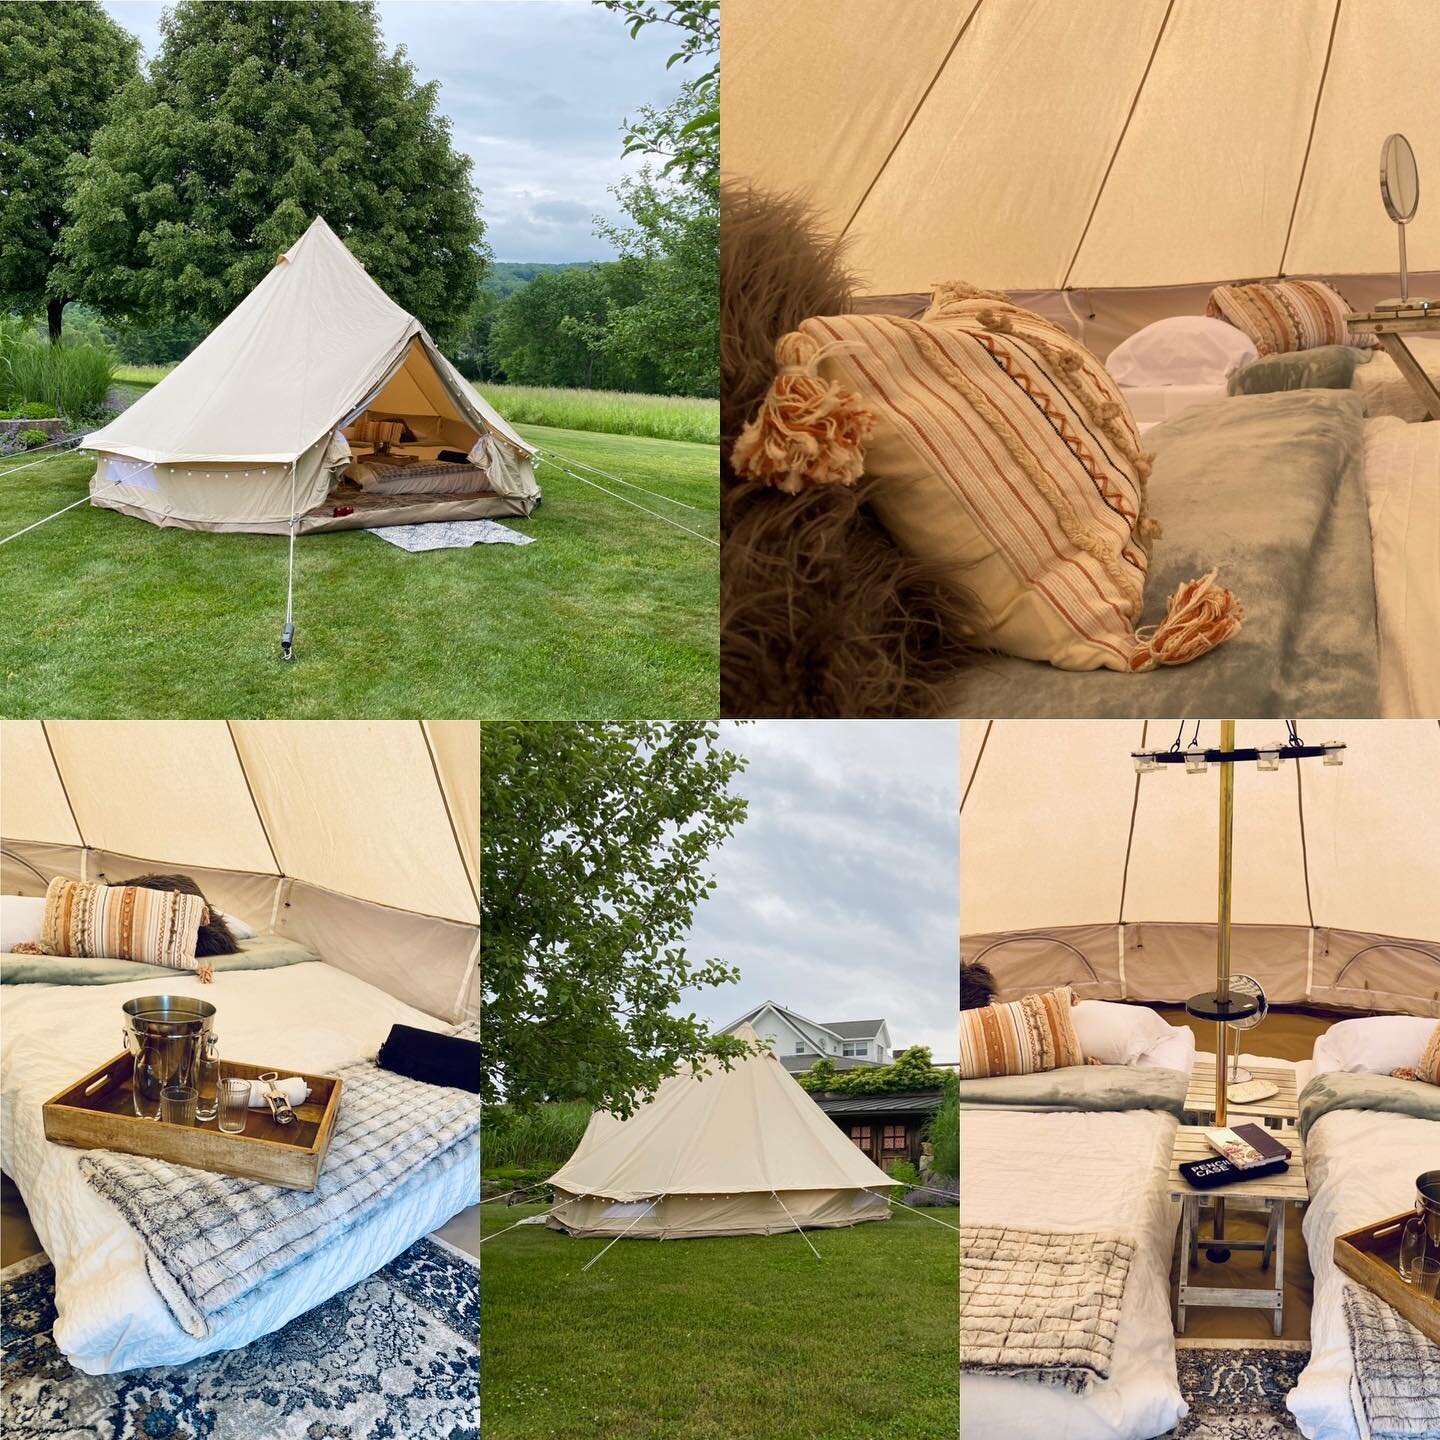 Two lucky best friends got a surprise  Glamping tent for the weekend!  After a long COVID separation they are sure to have a blast! #prosecco #undercanvas  #glamping #two #bestfriends #lucky #photooftheday @millertonnewyork @yourevent.us #eventplanne